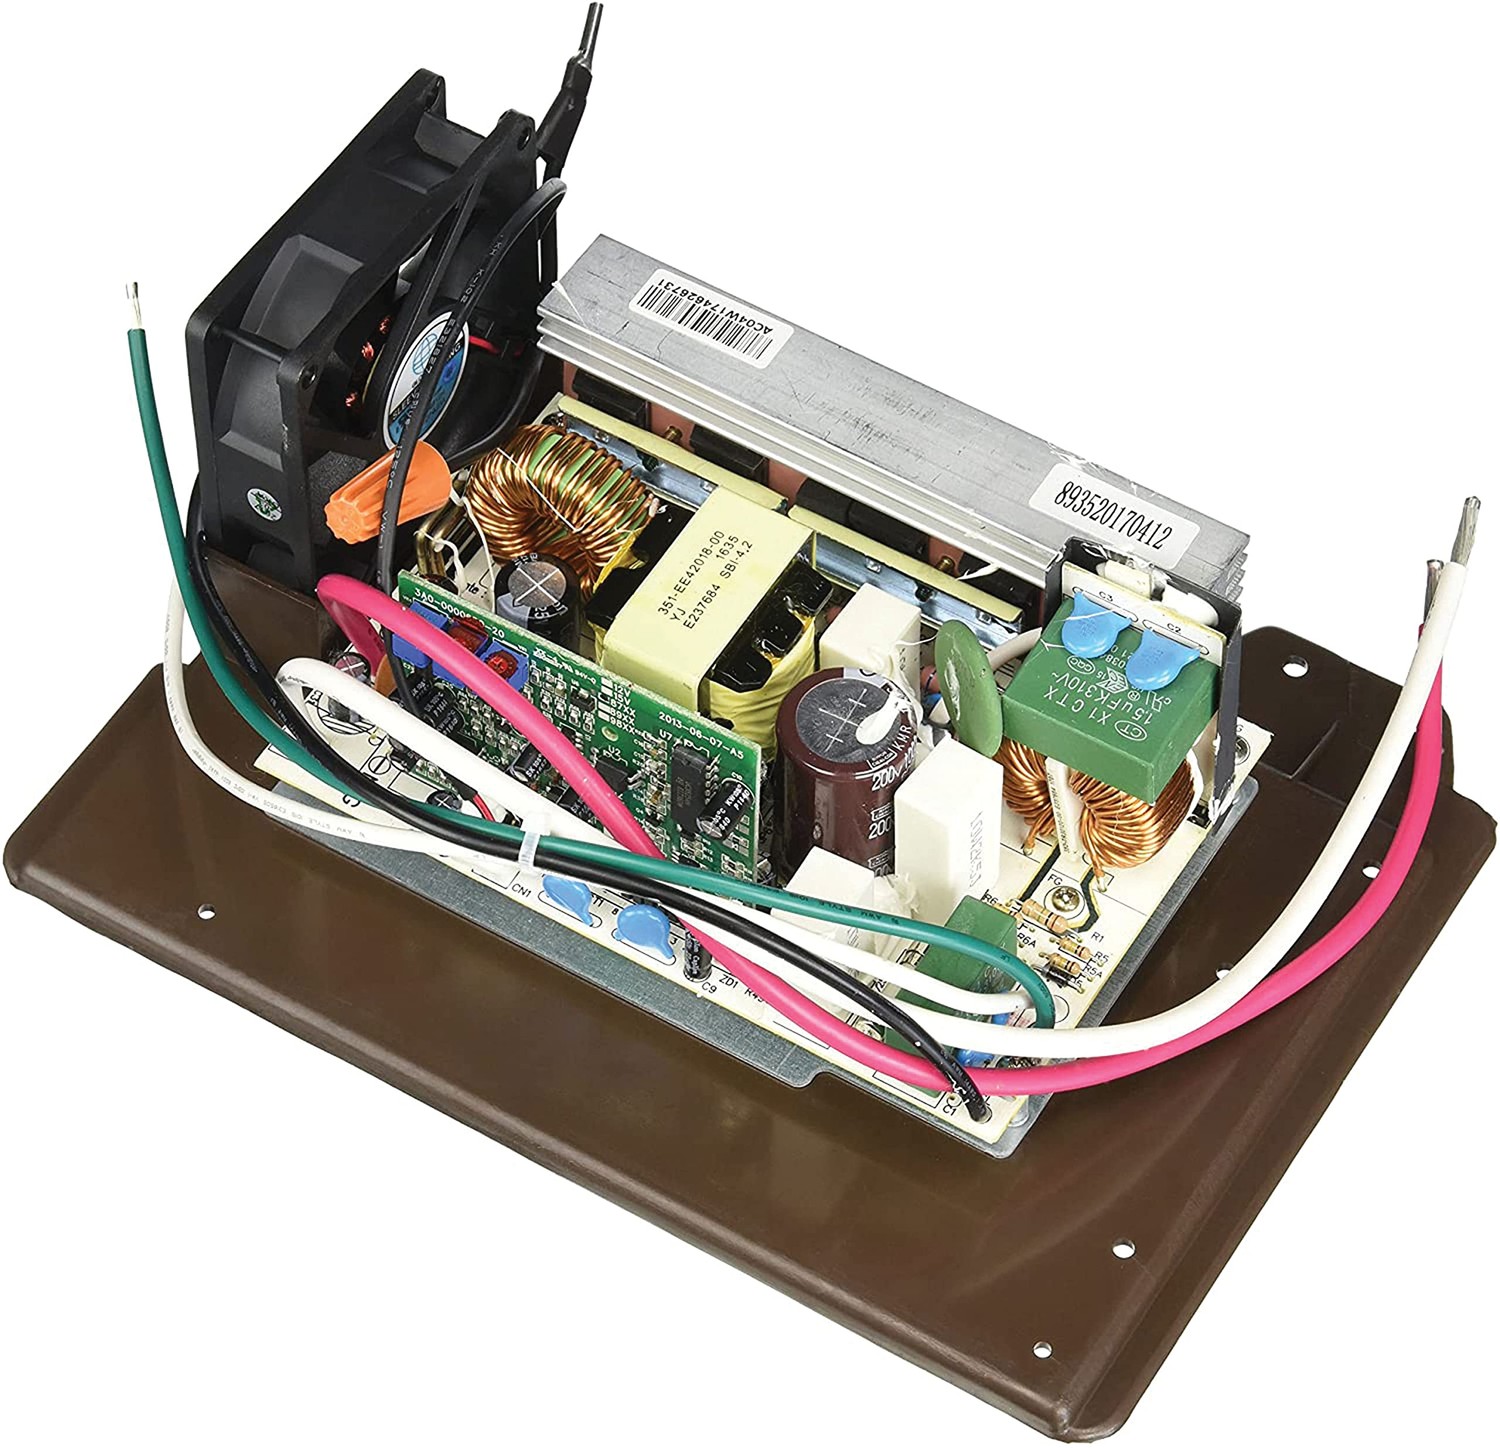 Converter/Charger W/Dist Center For 30 Amp Ac Service-35 Amp Dc Output W/11 Circuits-Auto Detect